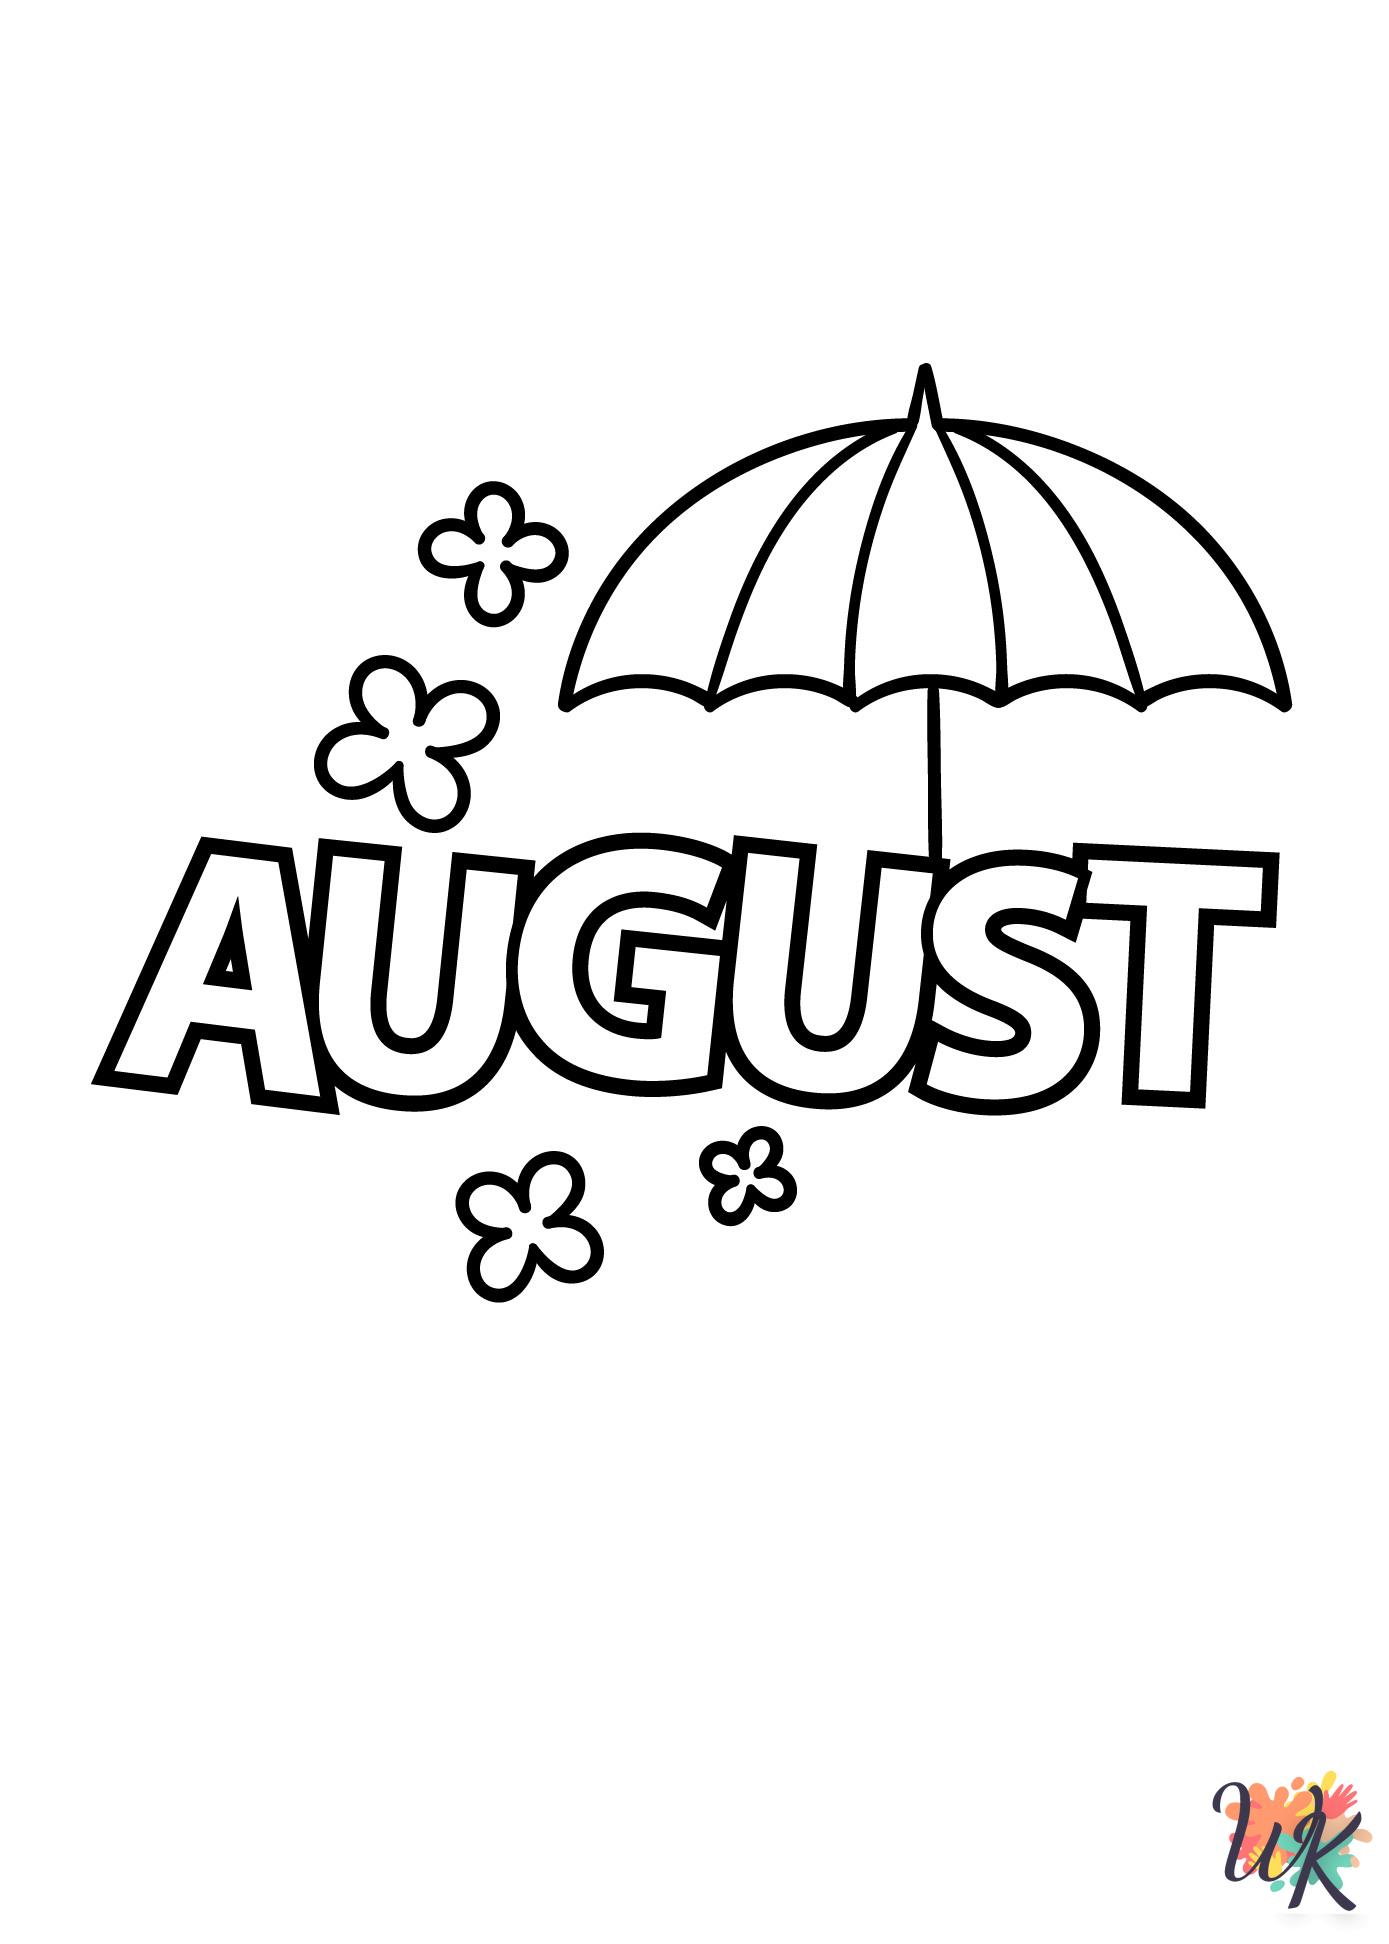 August printable coloring pages